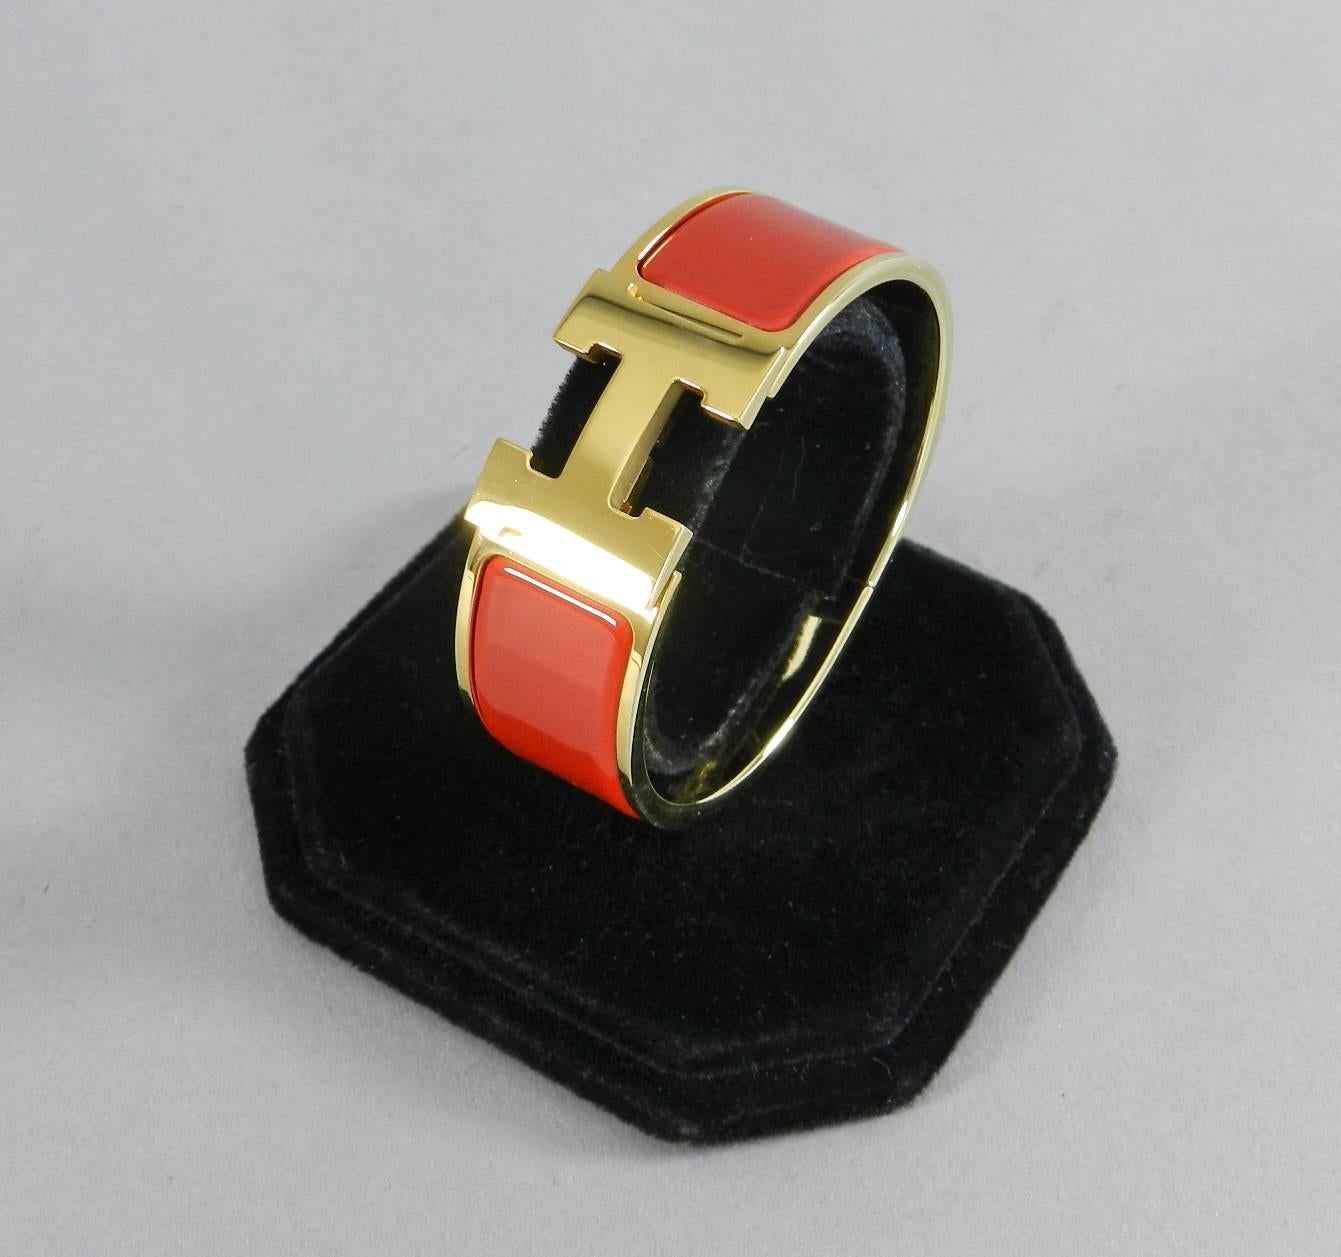 Hermes goldtone clic clac bracelet with H clasp in poppy / tomato red color.  PM size (Hermes says this should fit a wrist size of 15.5cm or 6 inches).  The interior circumference of the bracelet measure 6.25".  Total width is 20mm.  Excellent